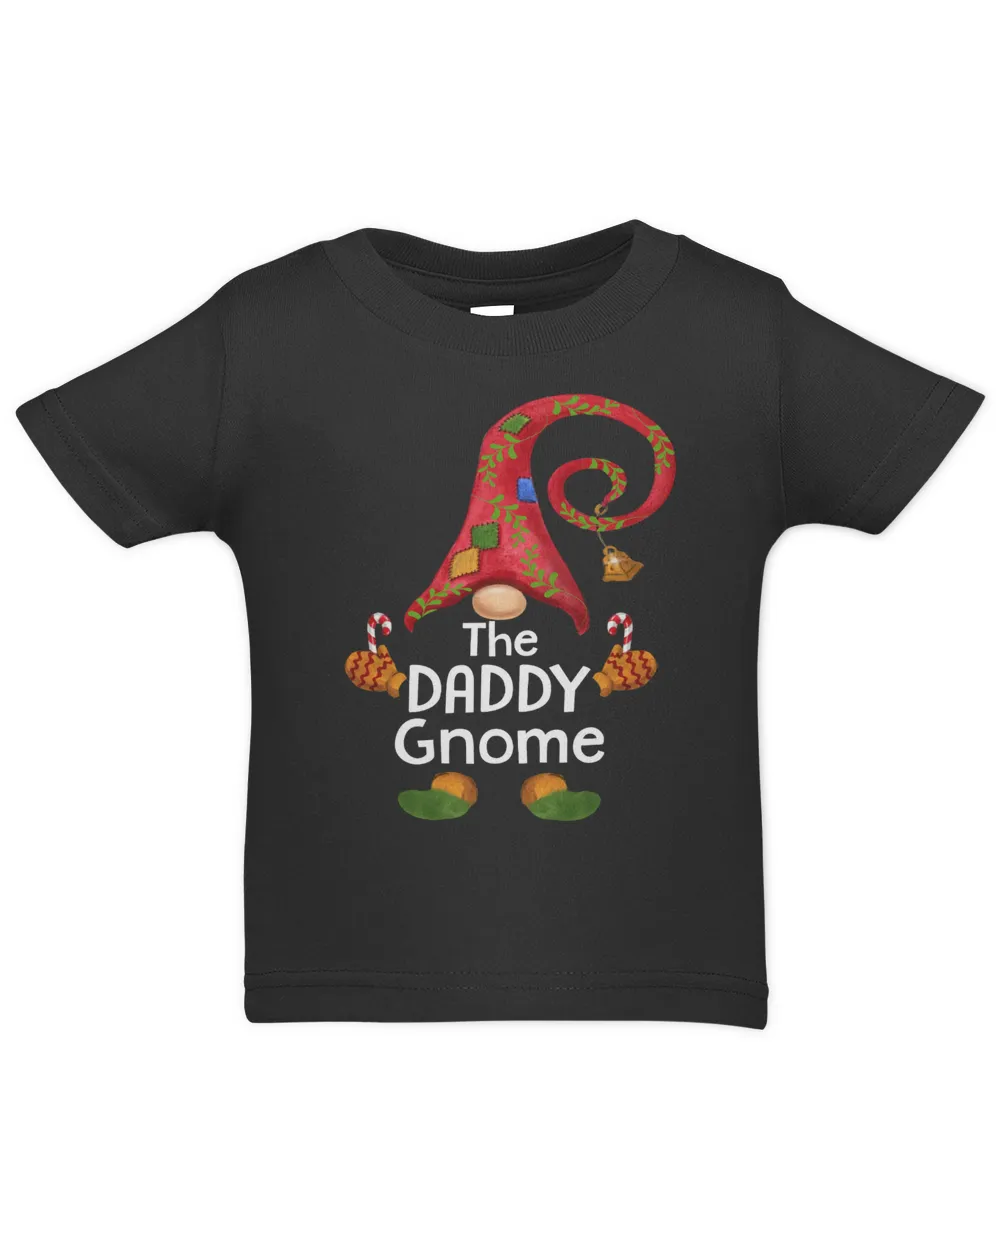 Matching Family Funny The Daddy Gnome Christmas PJ Group